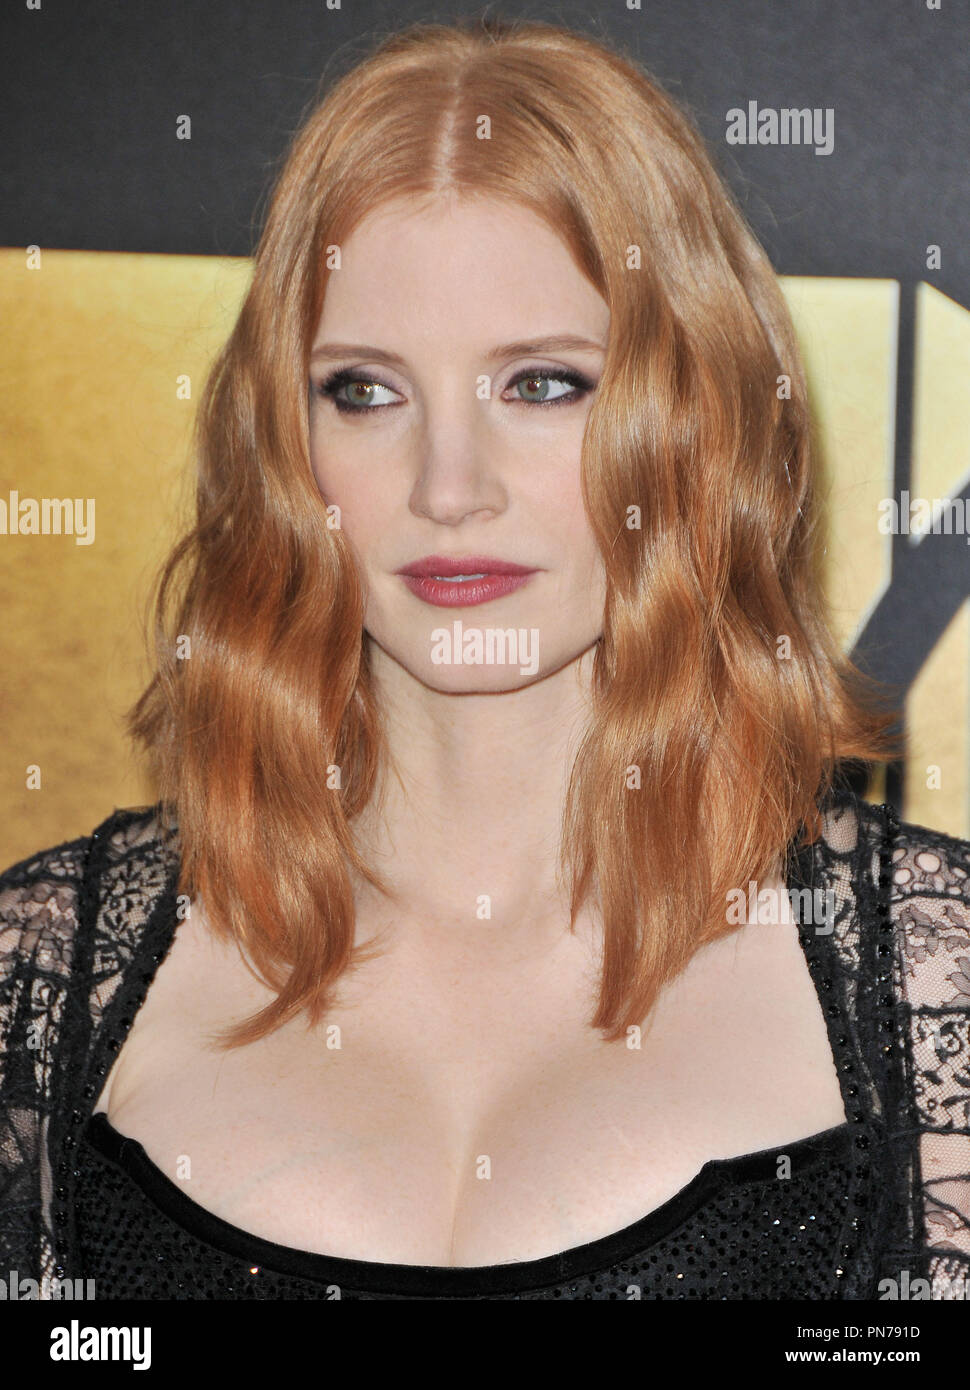 Jessica Chastain at the 2016 MTV Movie Awards held at the Warner Bros Studios in Burbank, CA on Saturday, April 9, 2016. Photo by PRPP PRPP / PictureLux  File Reference # 32881 066PRPP01  For Editorial Use Only -  All Rights Reserved Stock Photo